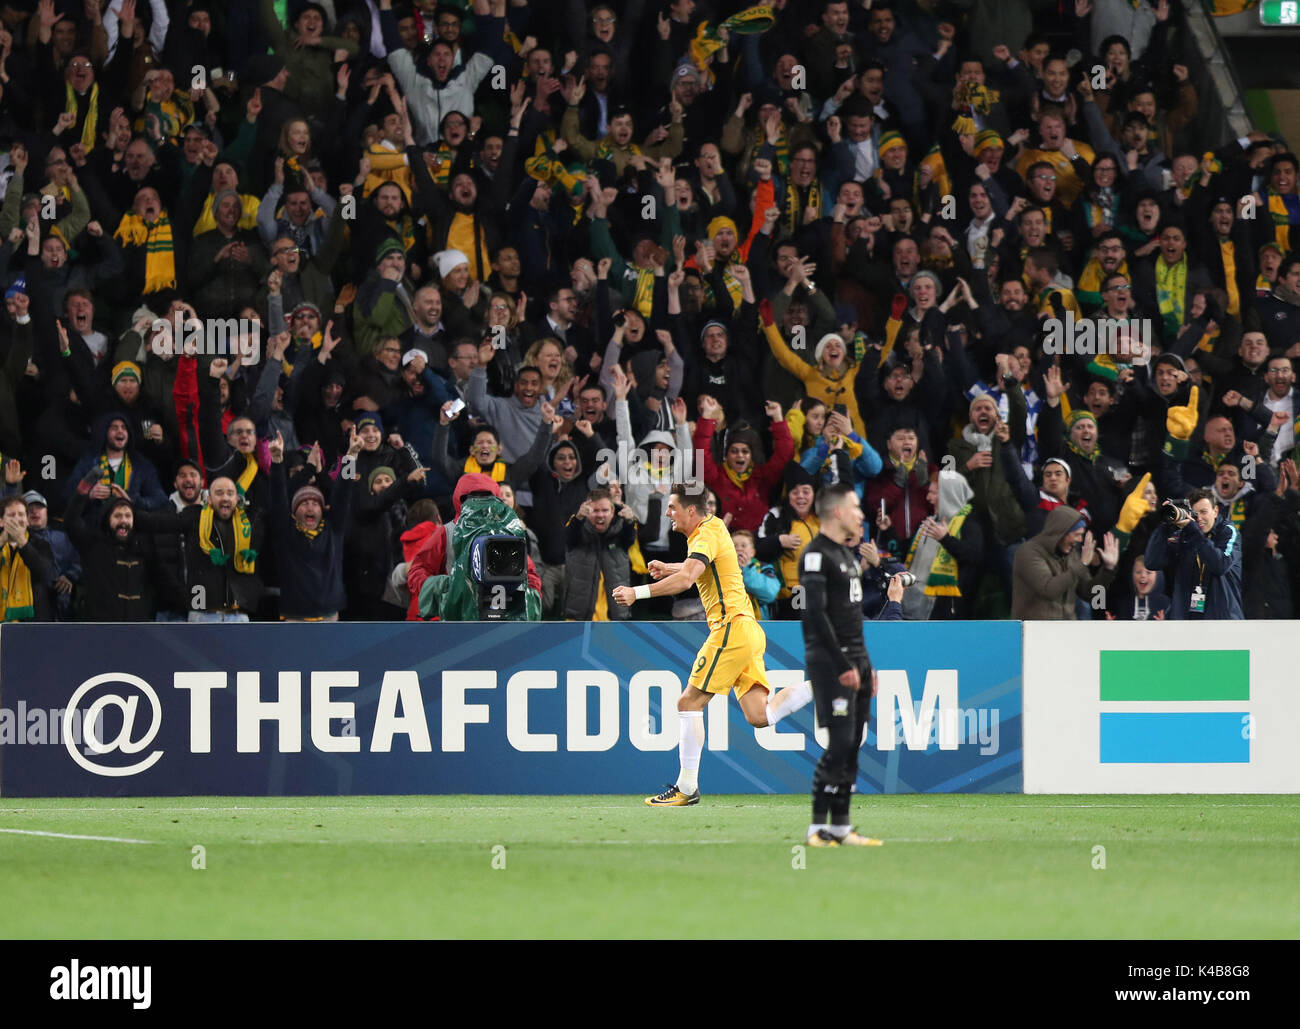 Melbourne, Australia. 5th Sep, 2017. Tomi Juric (L) of Australia celebrates after scoring during the FIFA world cup 2018 qualification match between Australia and Thailand at Melbourne Rectangular Stadium in Melbourne, Australia, Sept. 5, 2017. Australia won 2-1. Credit: Bai Xuefei/Xinhua/Alamy Live News Stock Photo